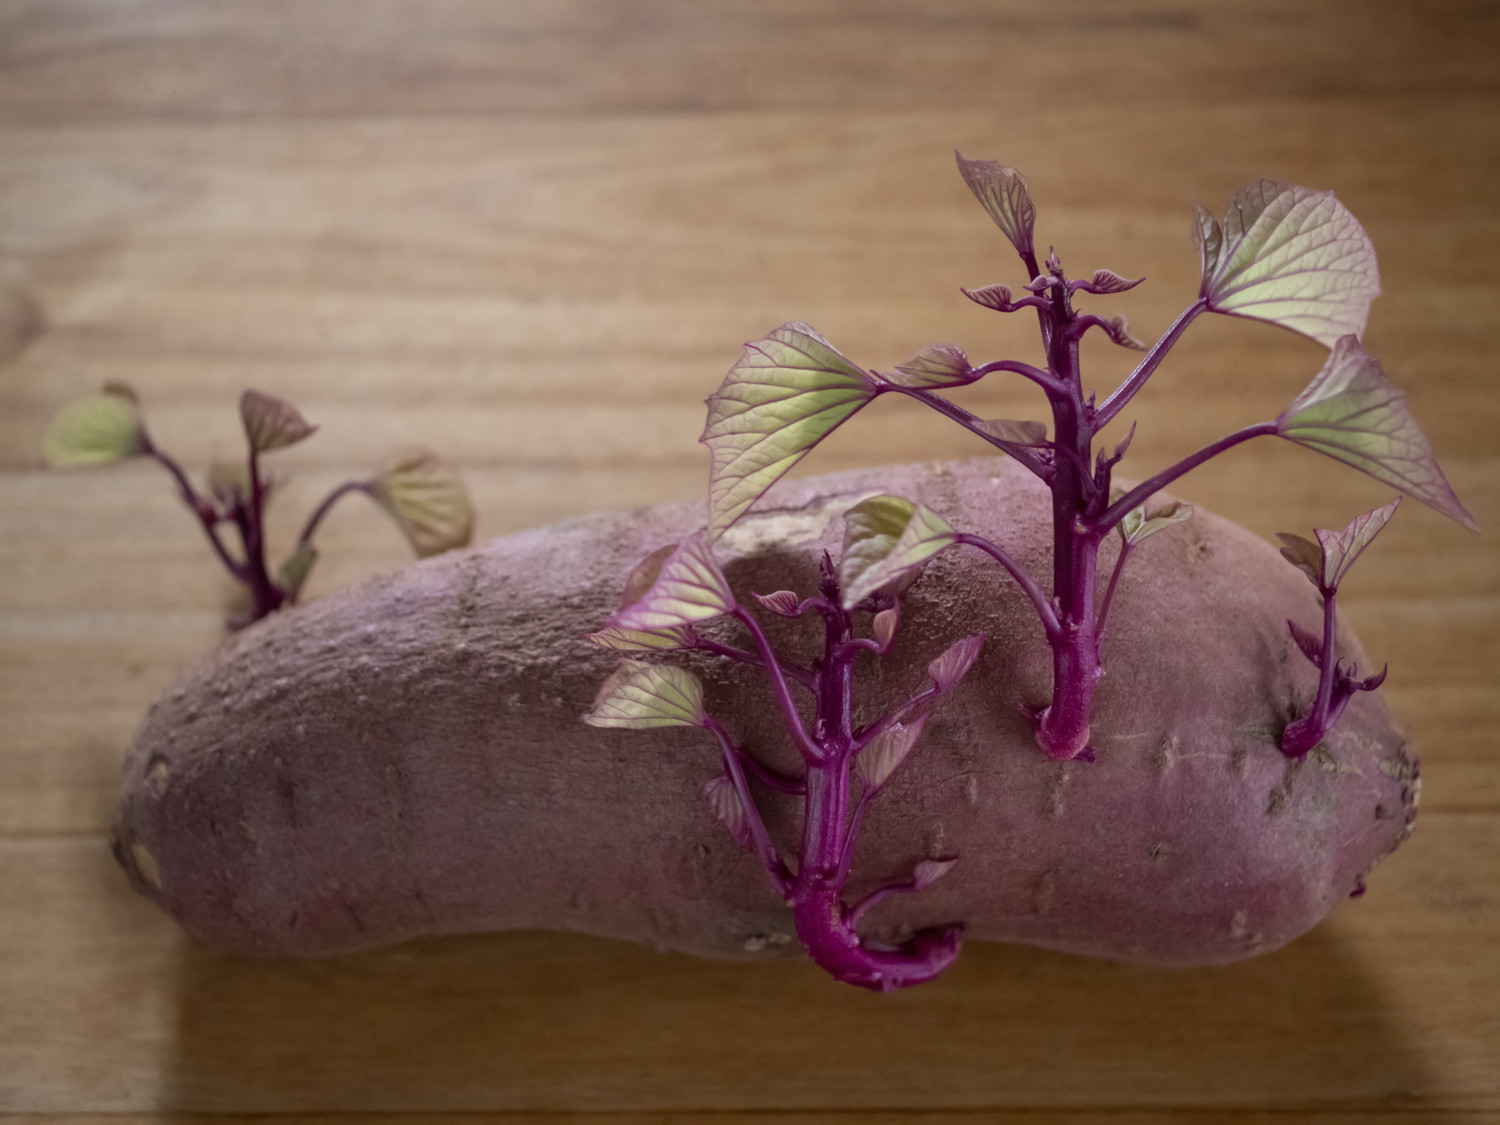 Sprouted sweet potato